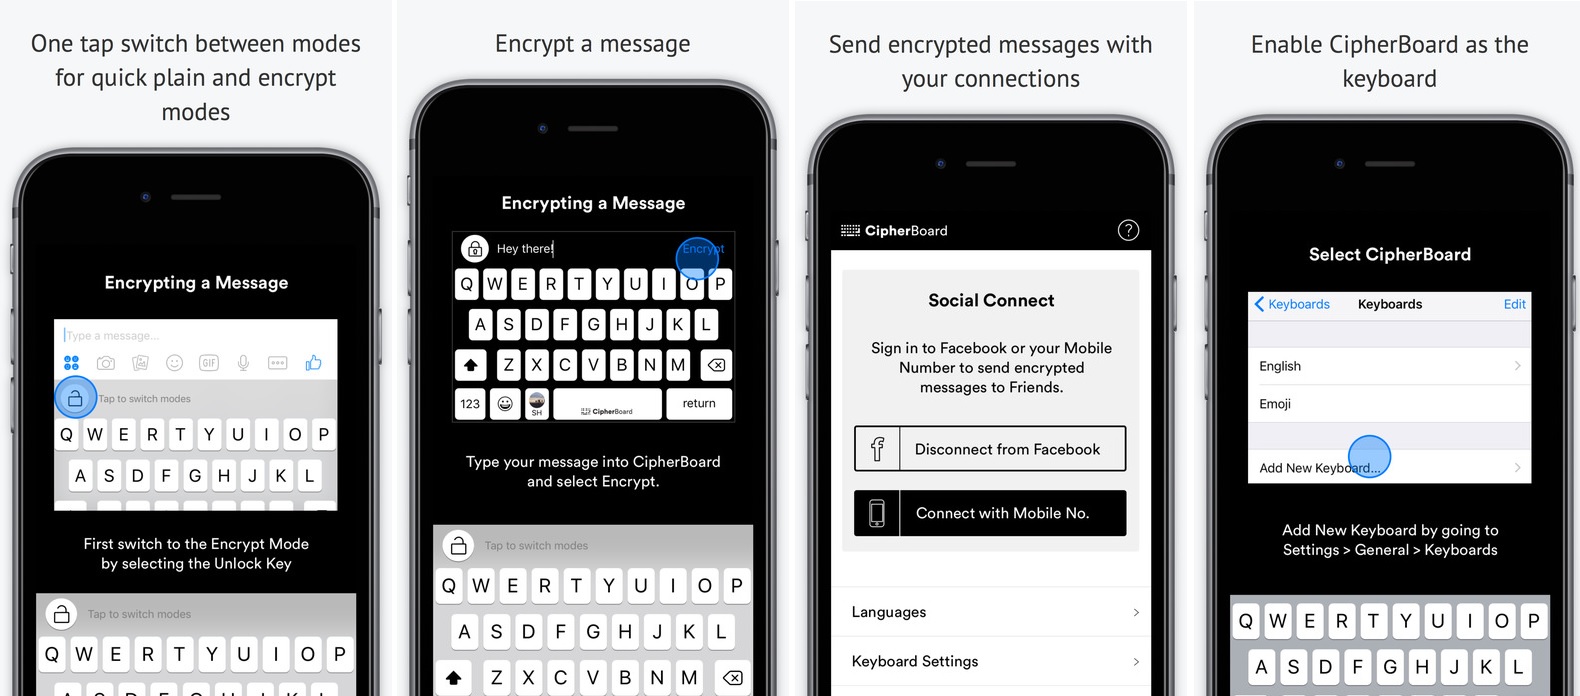 Messages Sent From Smartphone Are Not As Secure: Is CipherBoard The Answer?